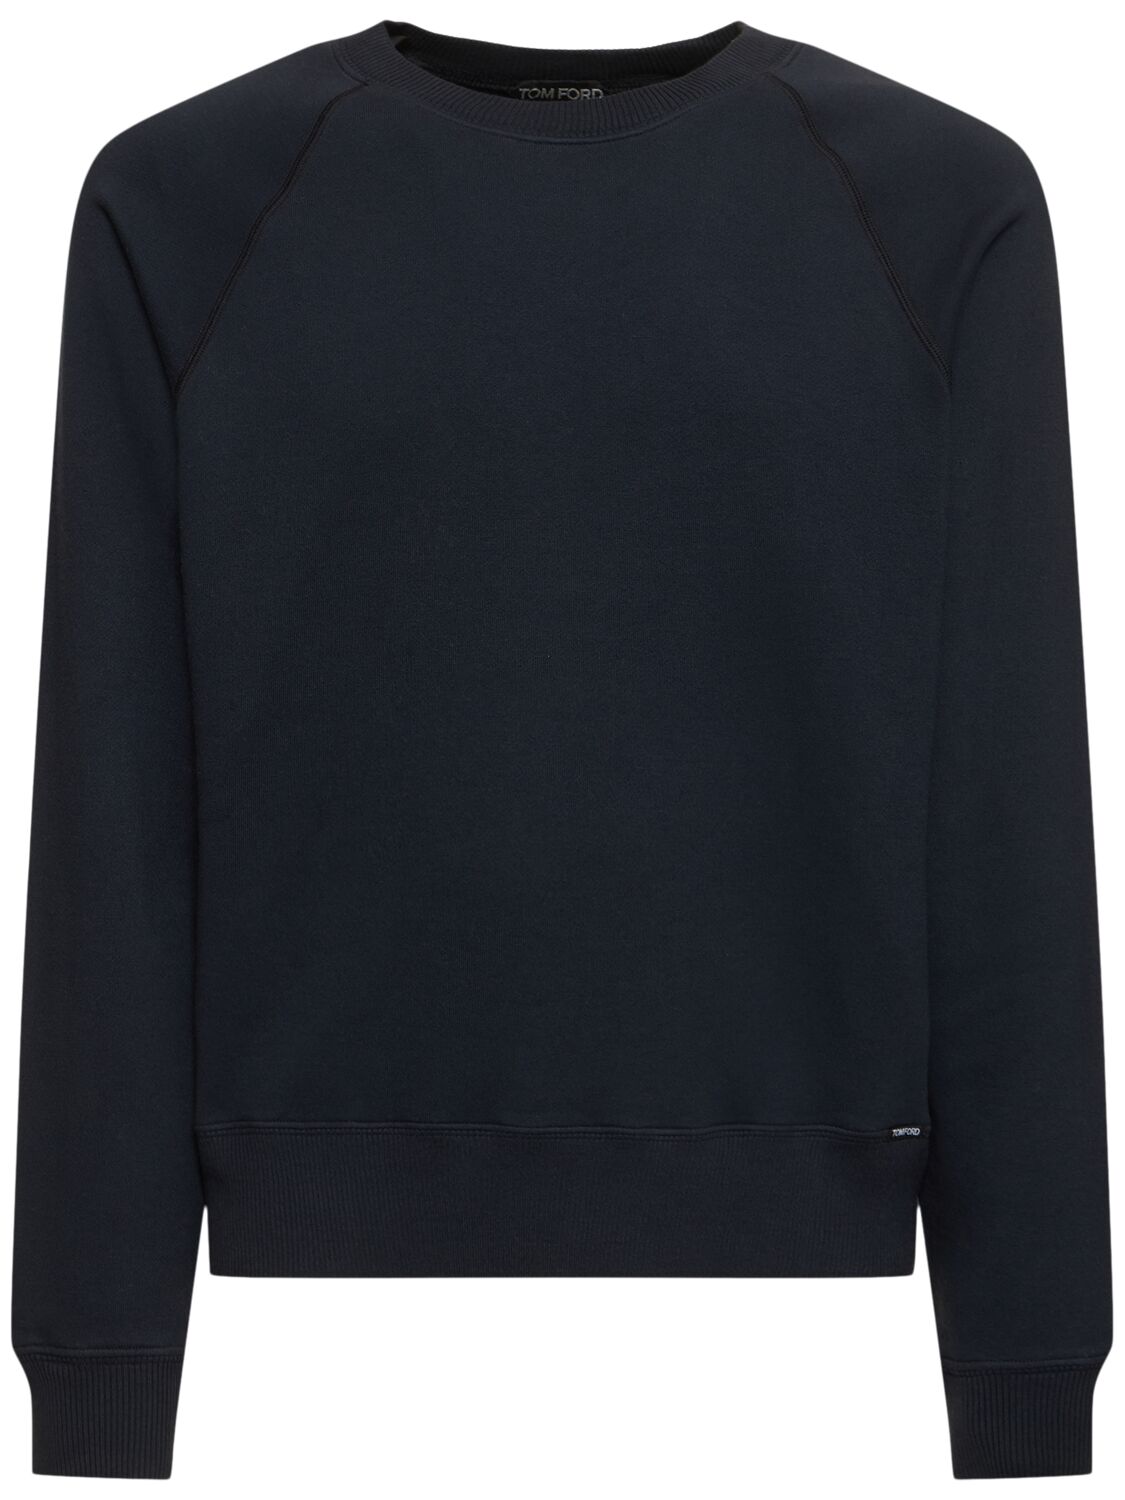 Tom Ford Vintage Garment Dyed Cotton Sweatshirt In Space Blue